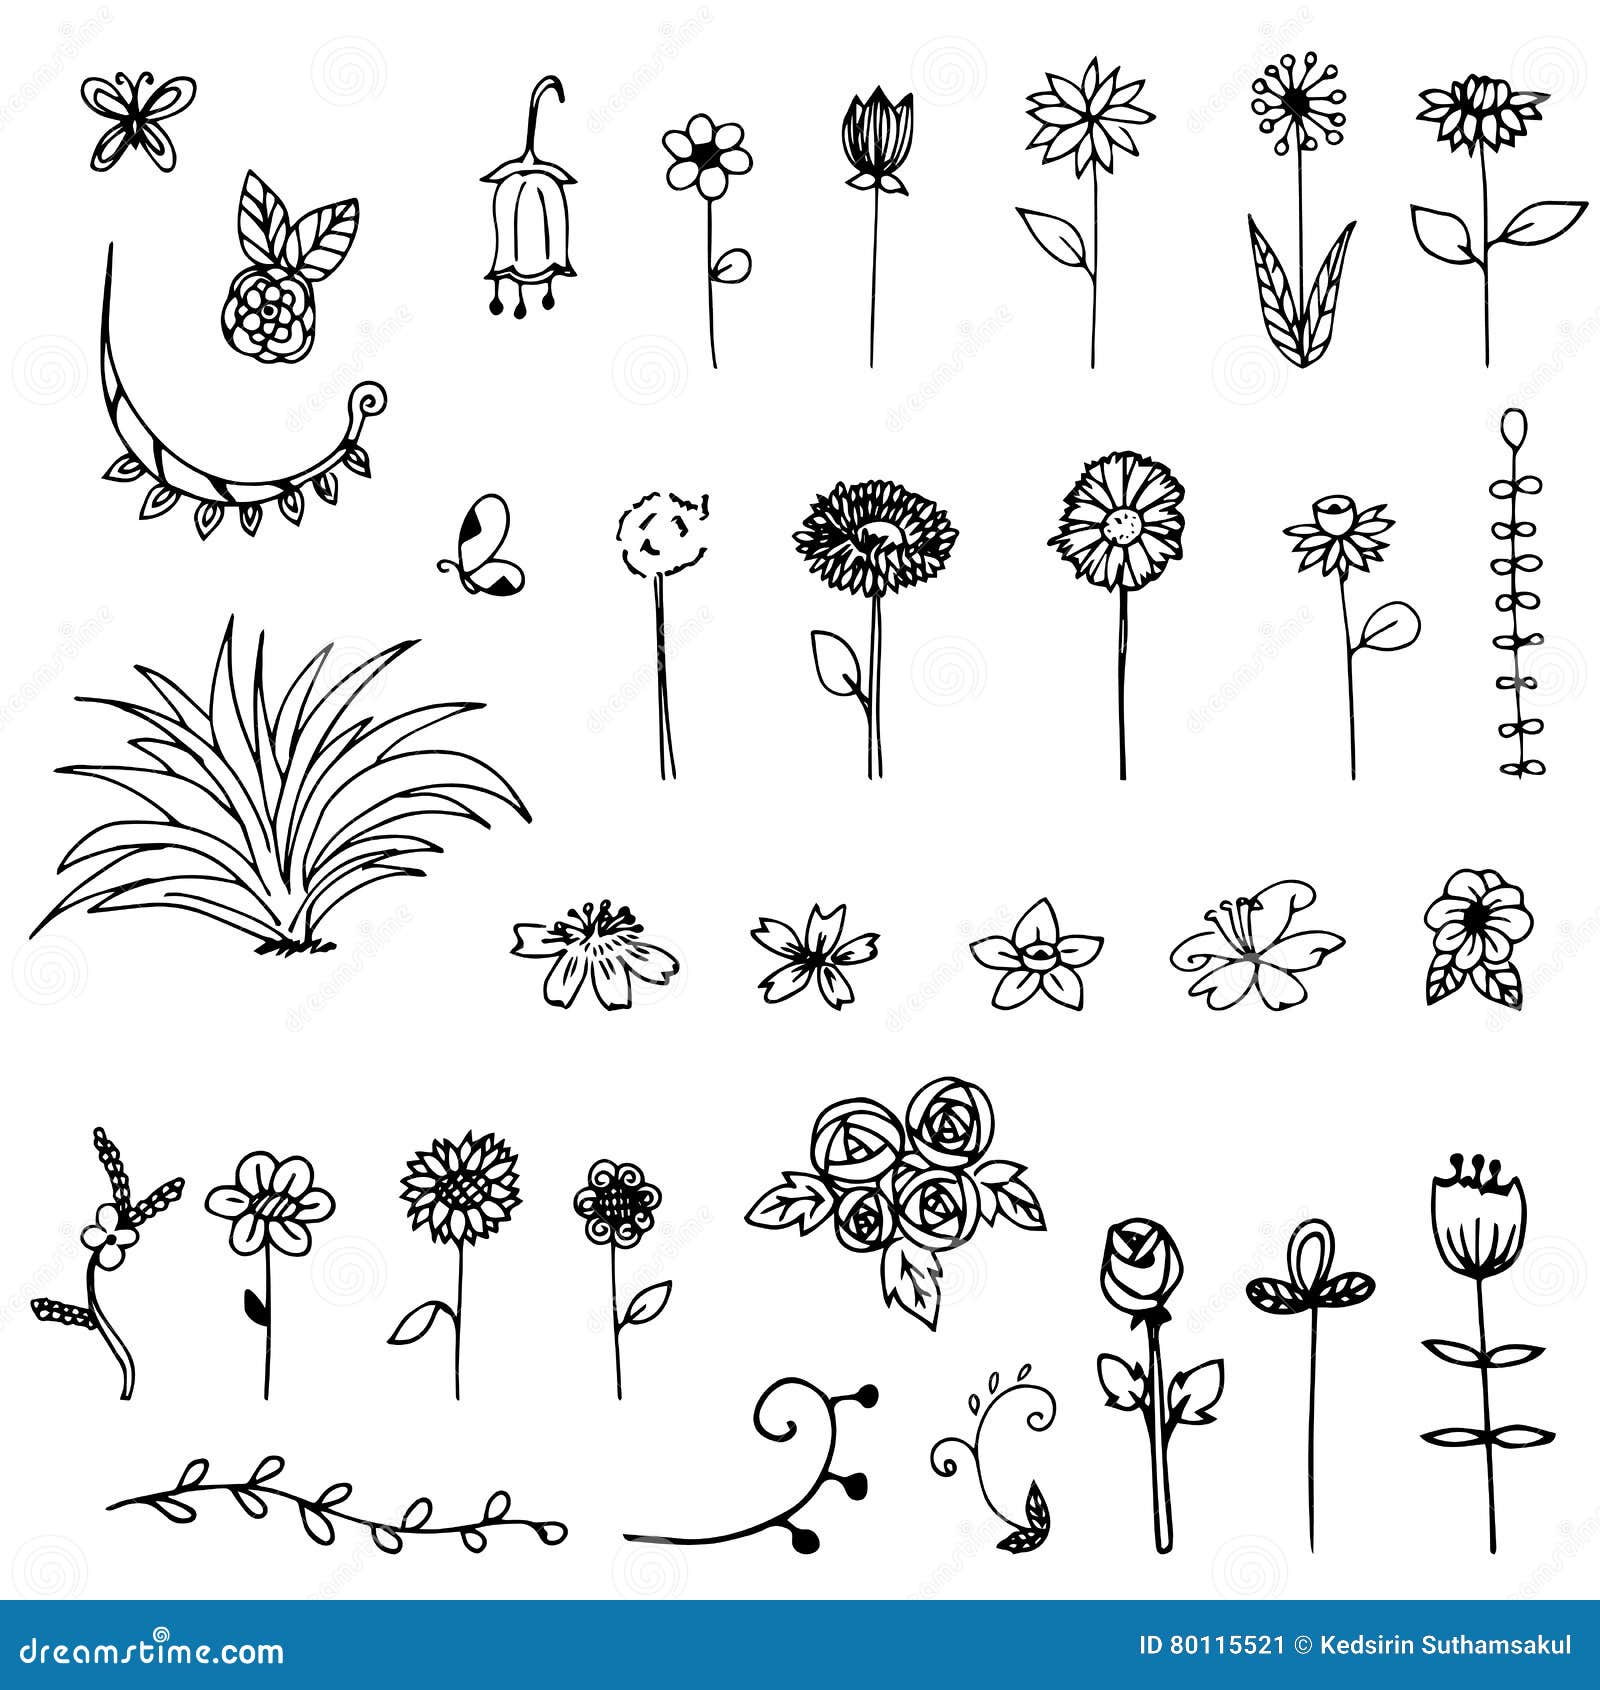 draw easy free hand design - Clip Art Library